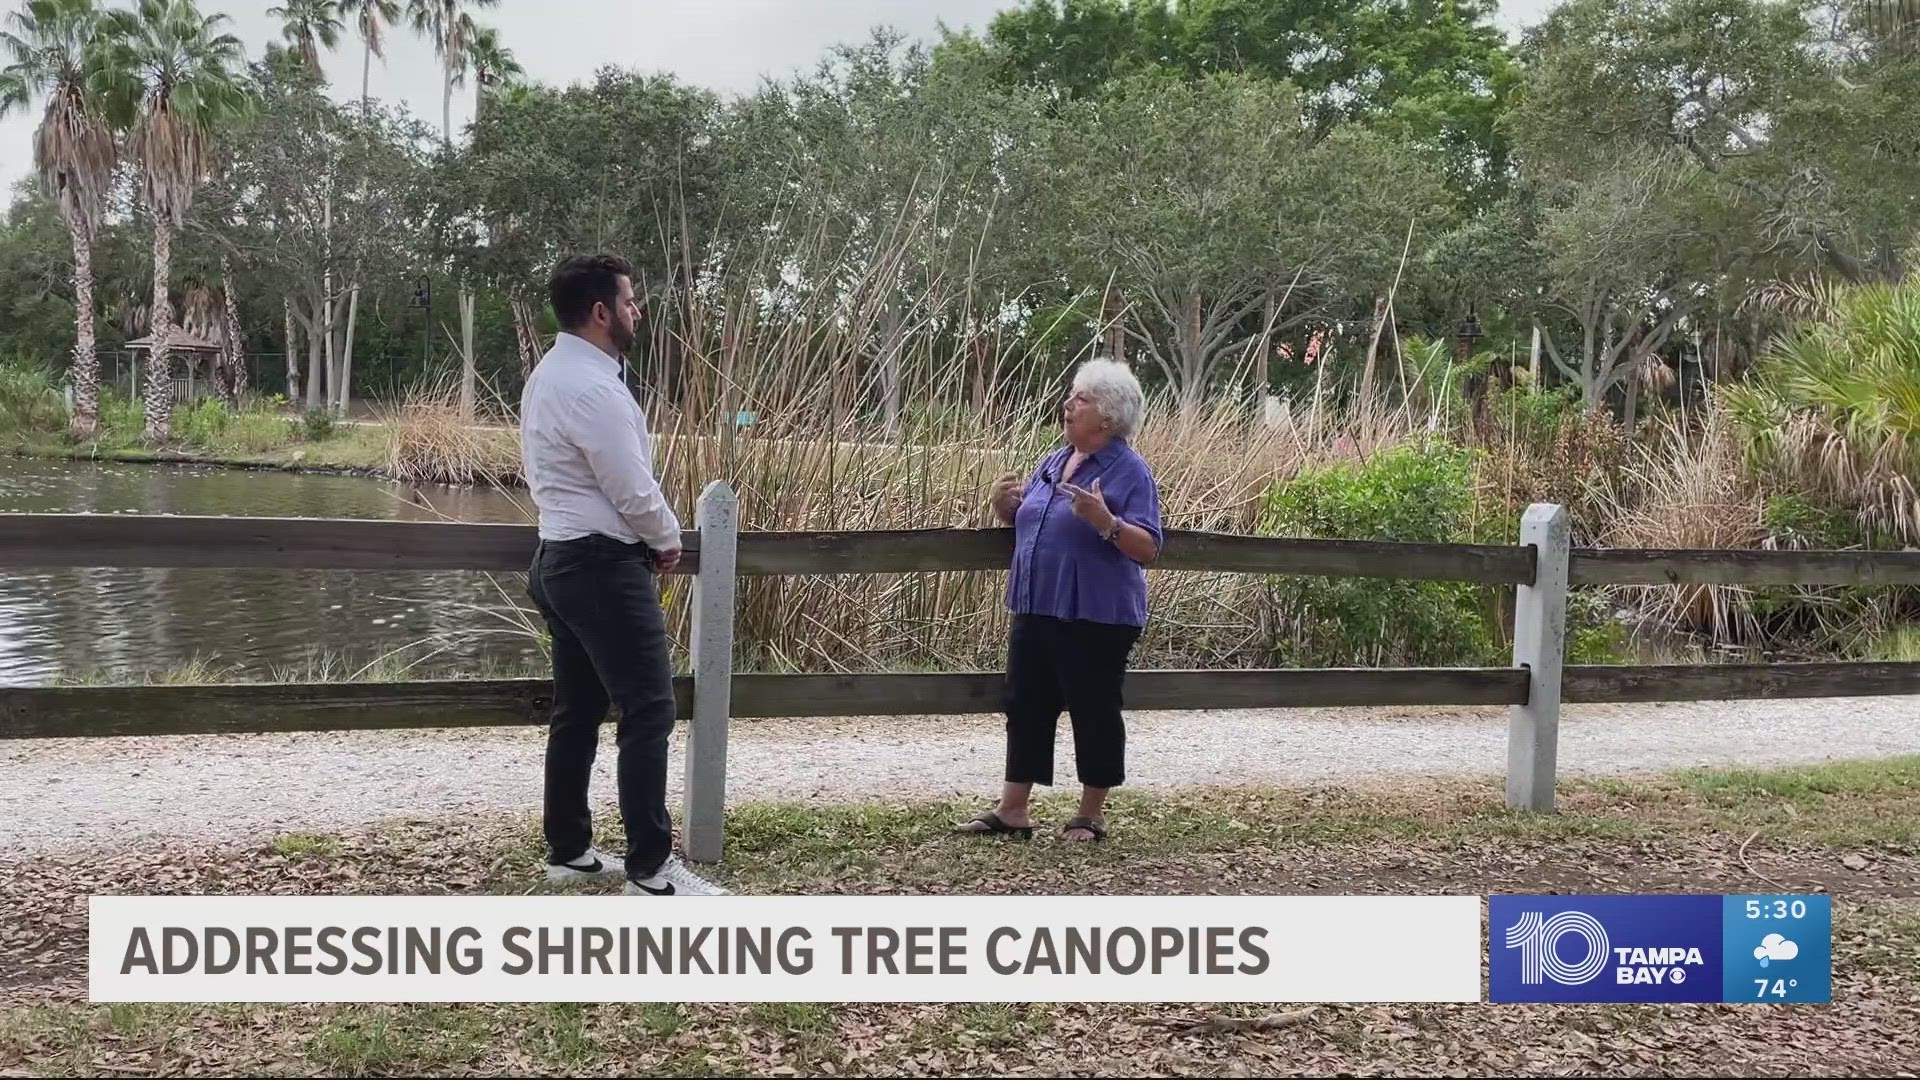 Many communities have incentives for residents who want to help plant trees on their property.